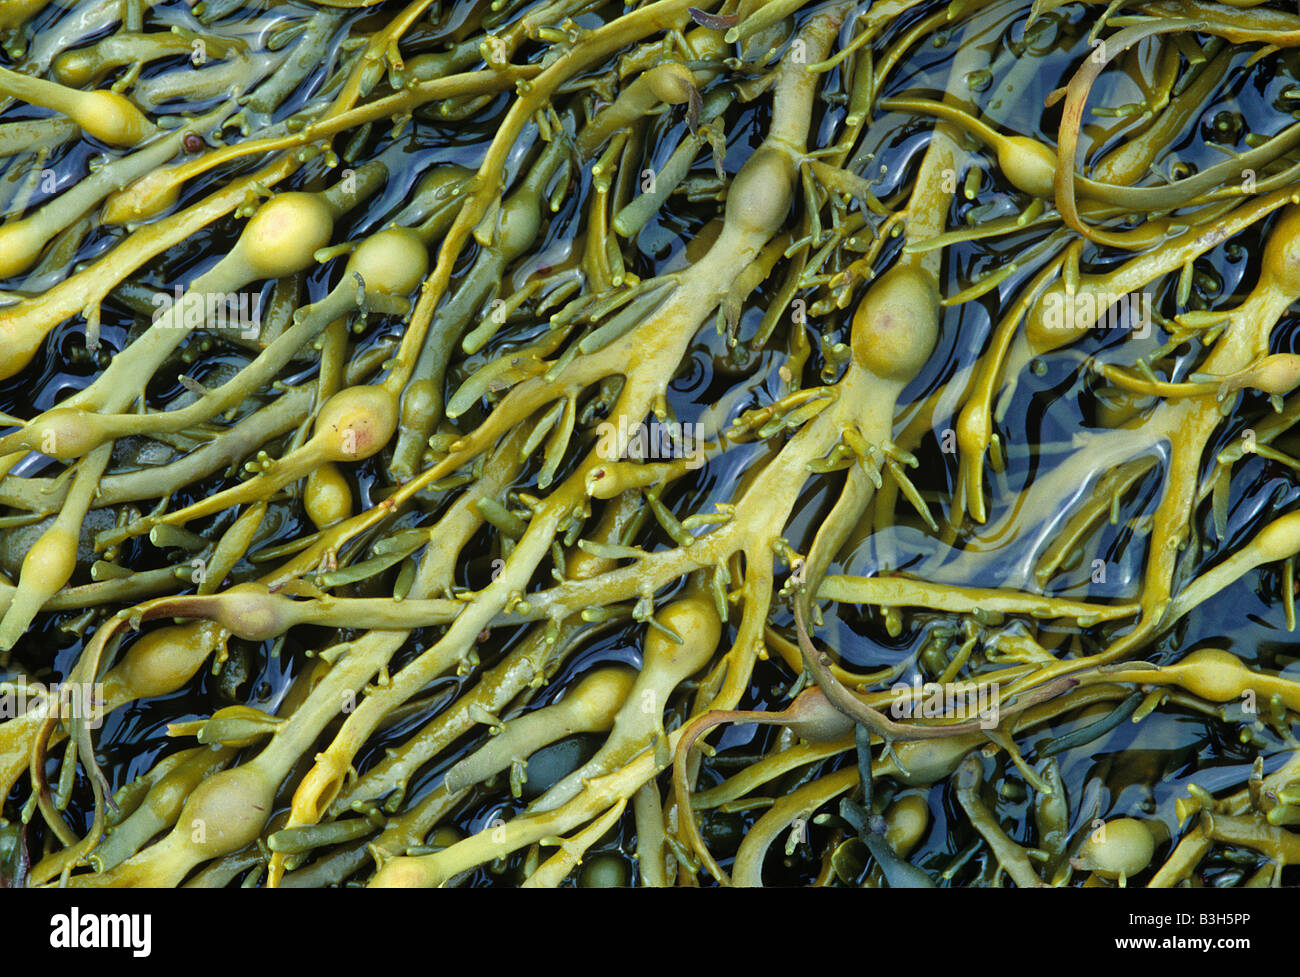 A brown seaweed or alga egg or knotted wrack Ascophyllum nodosum with air bladders buoyed up in the sea Stock Photo